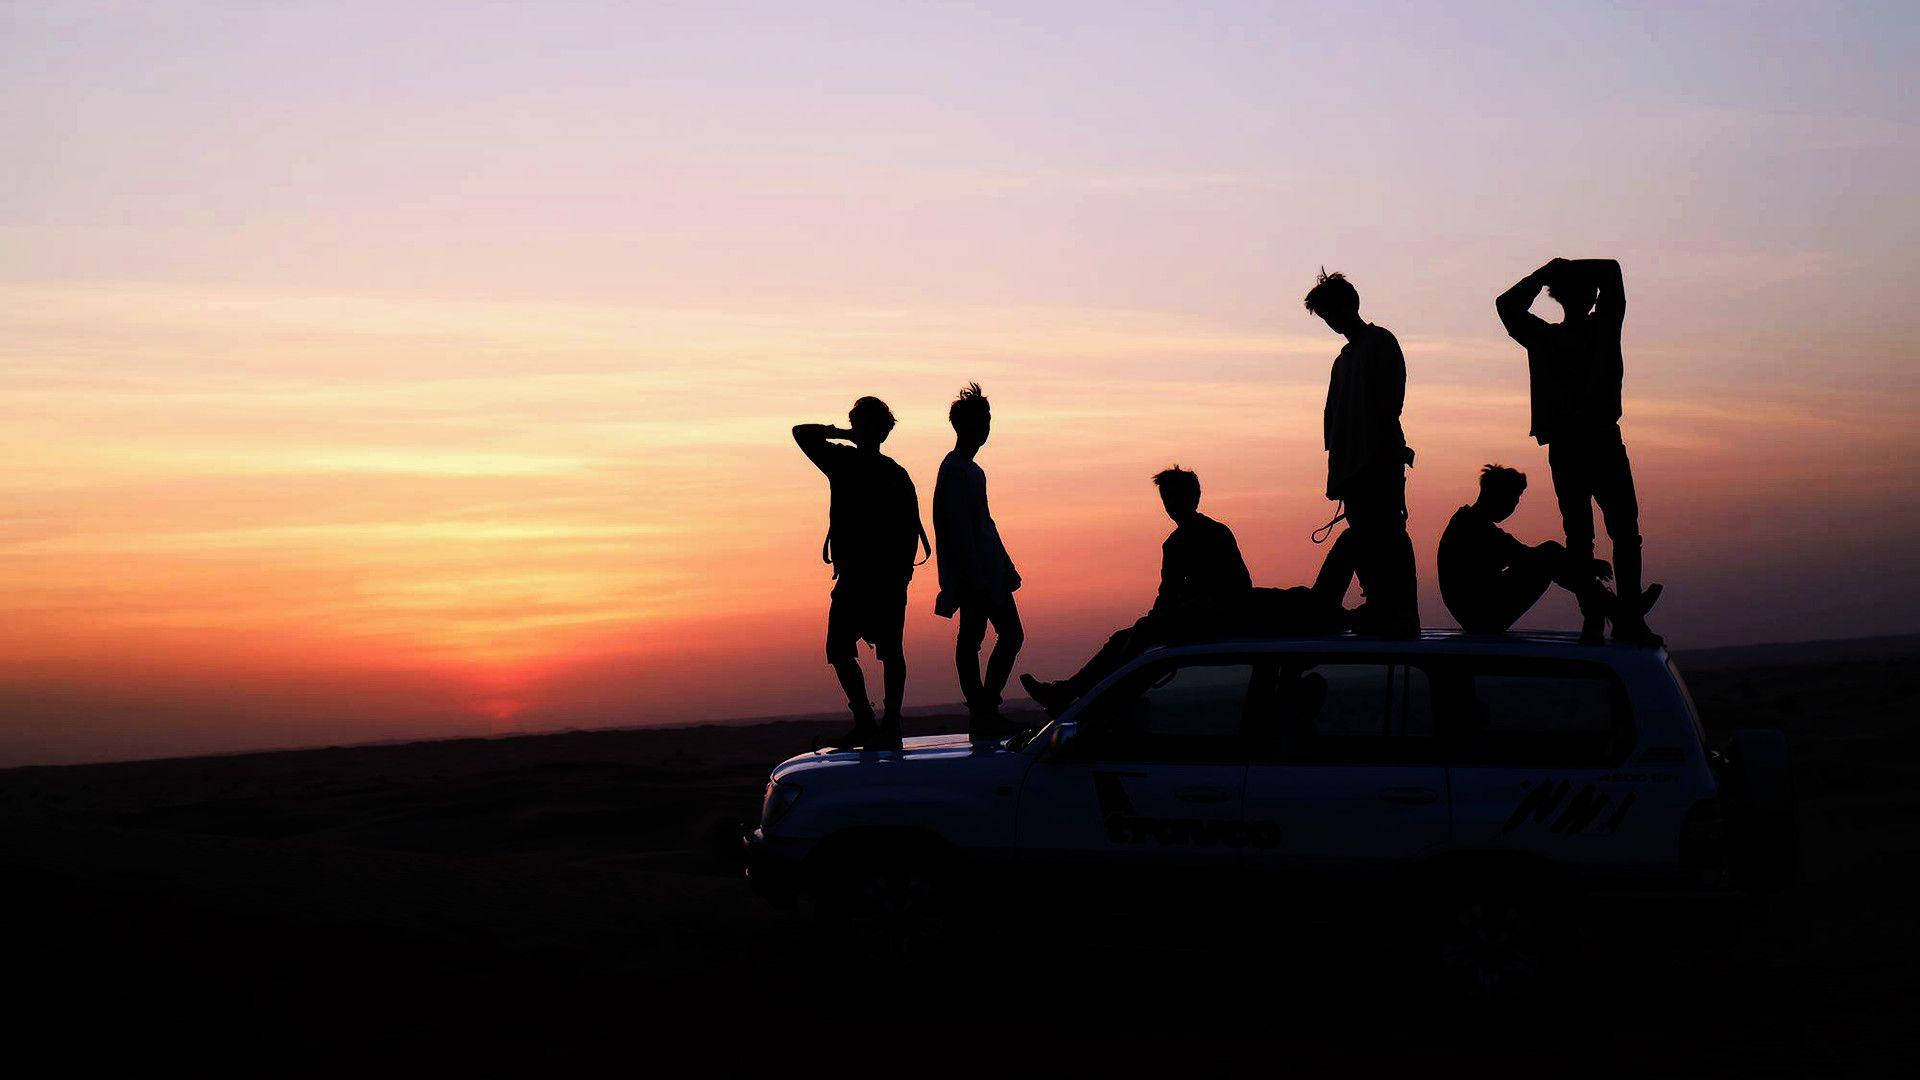 Silhouette Cool Bts Laptop Background